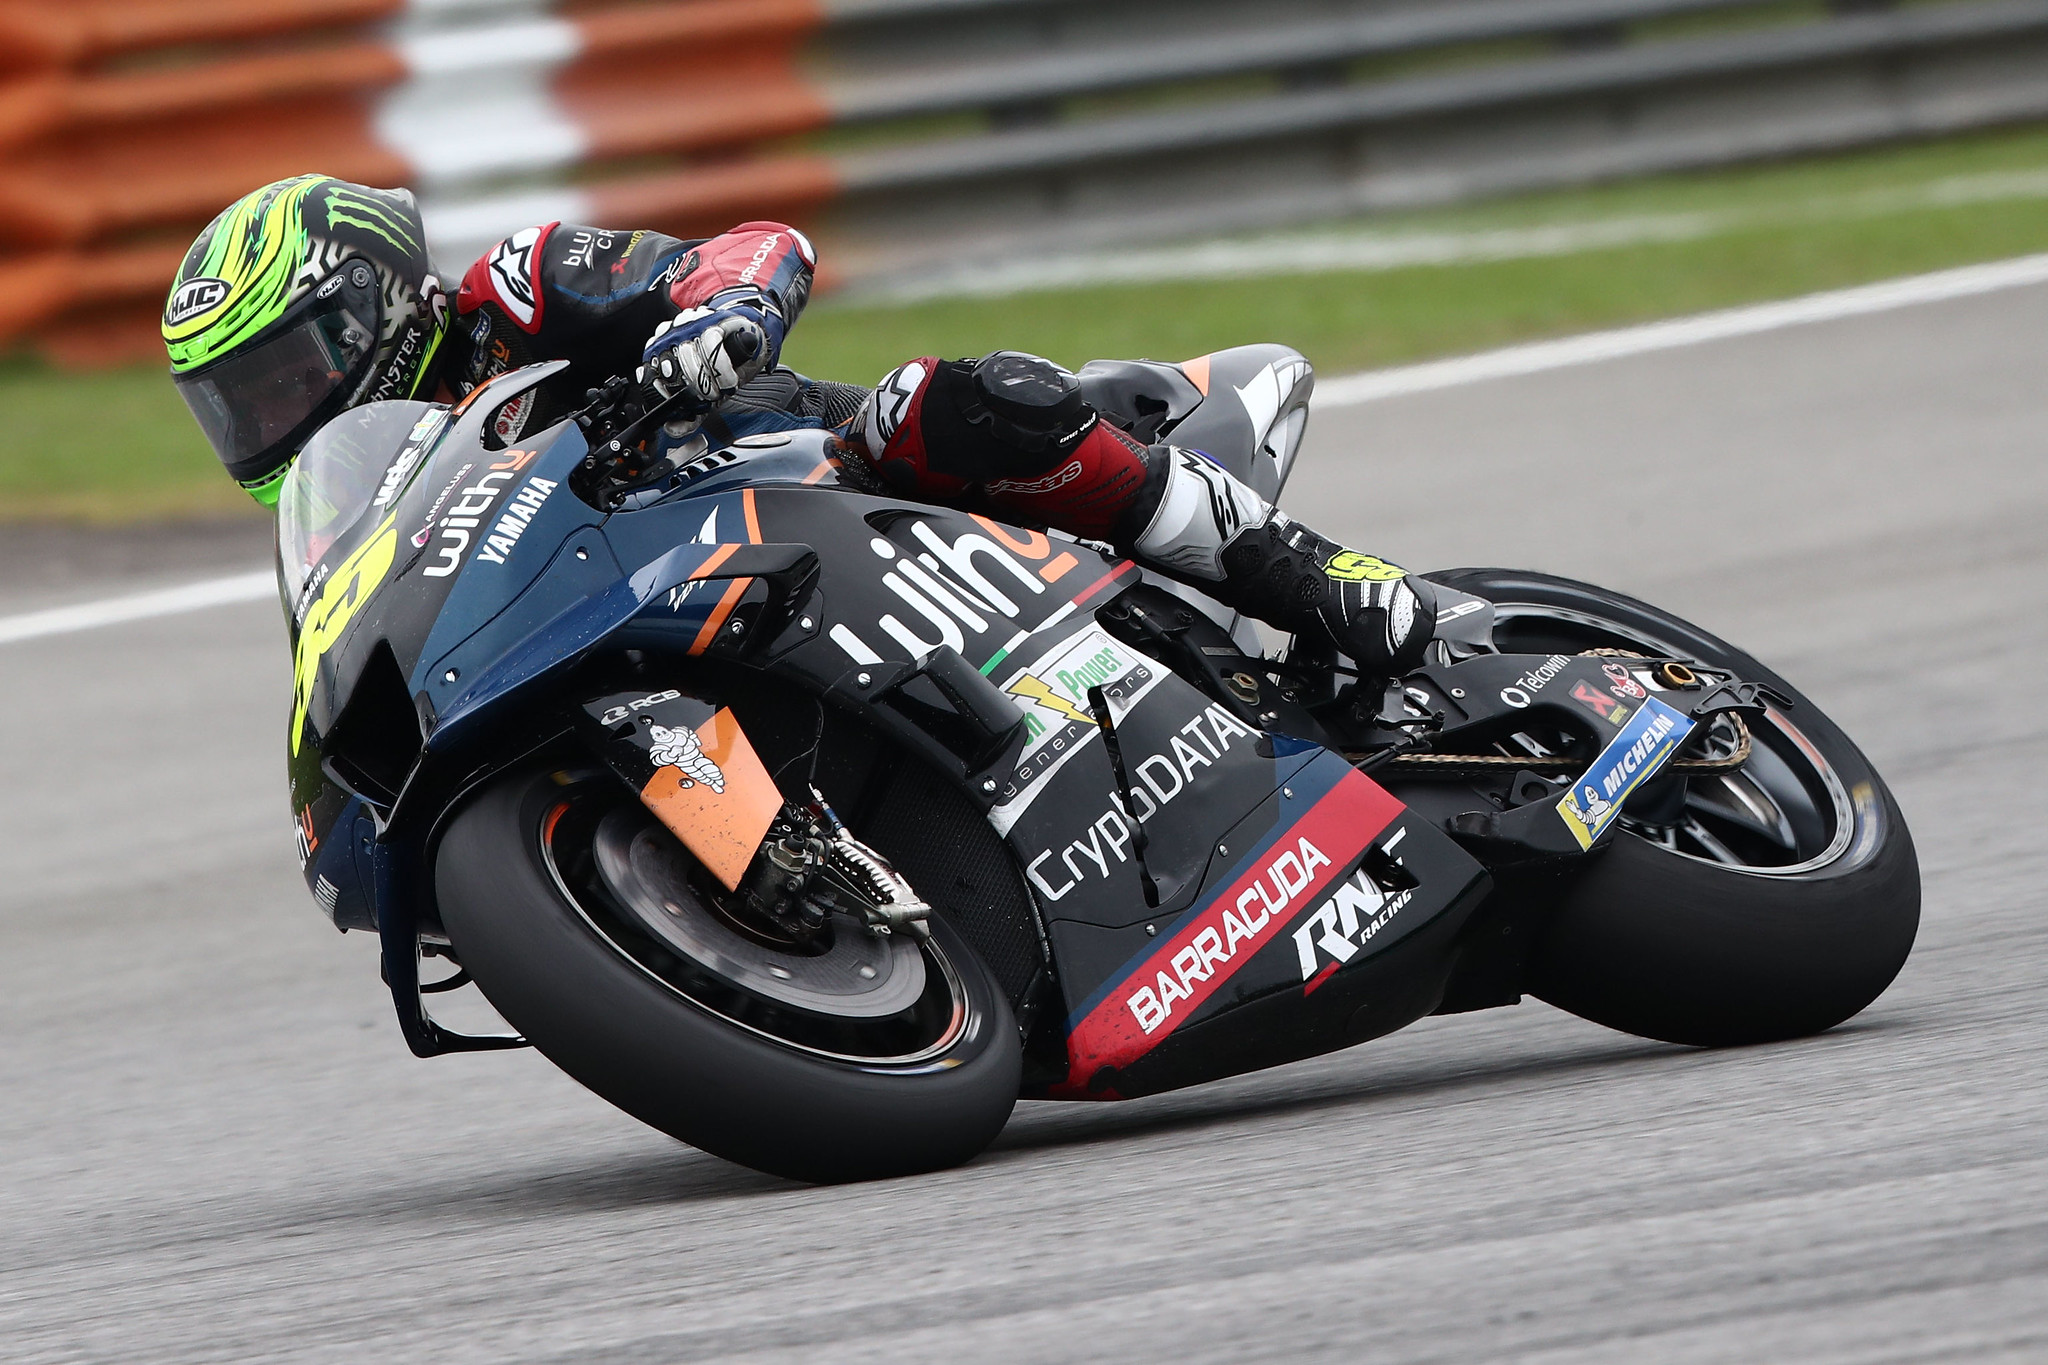 Crutchlow scores points in Malaysia